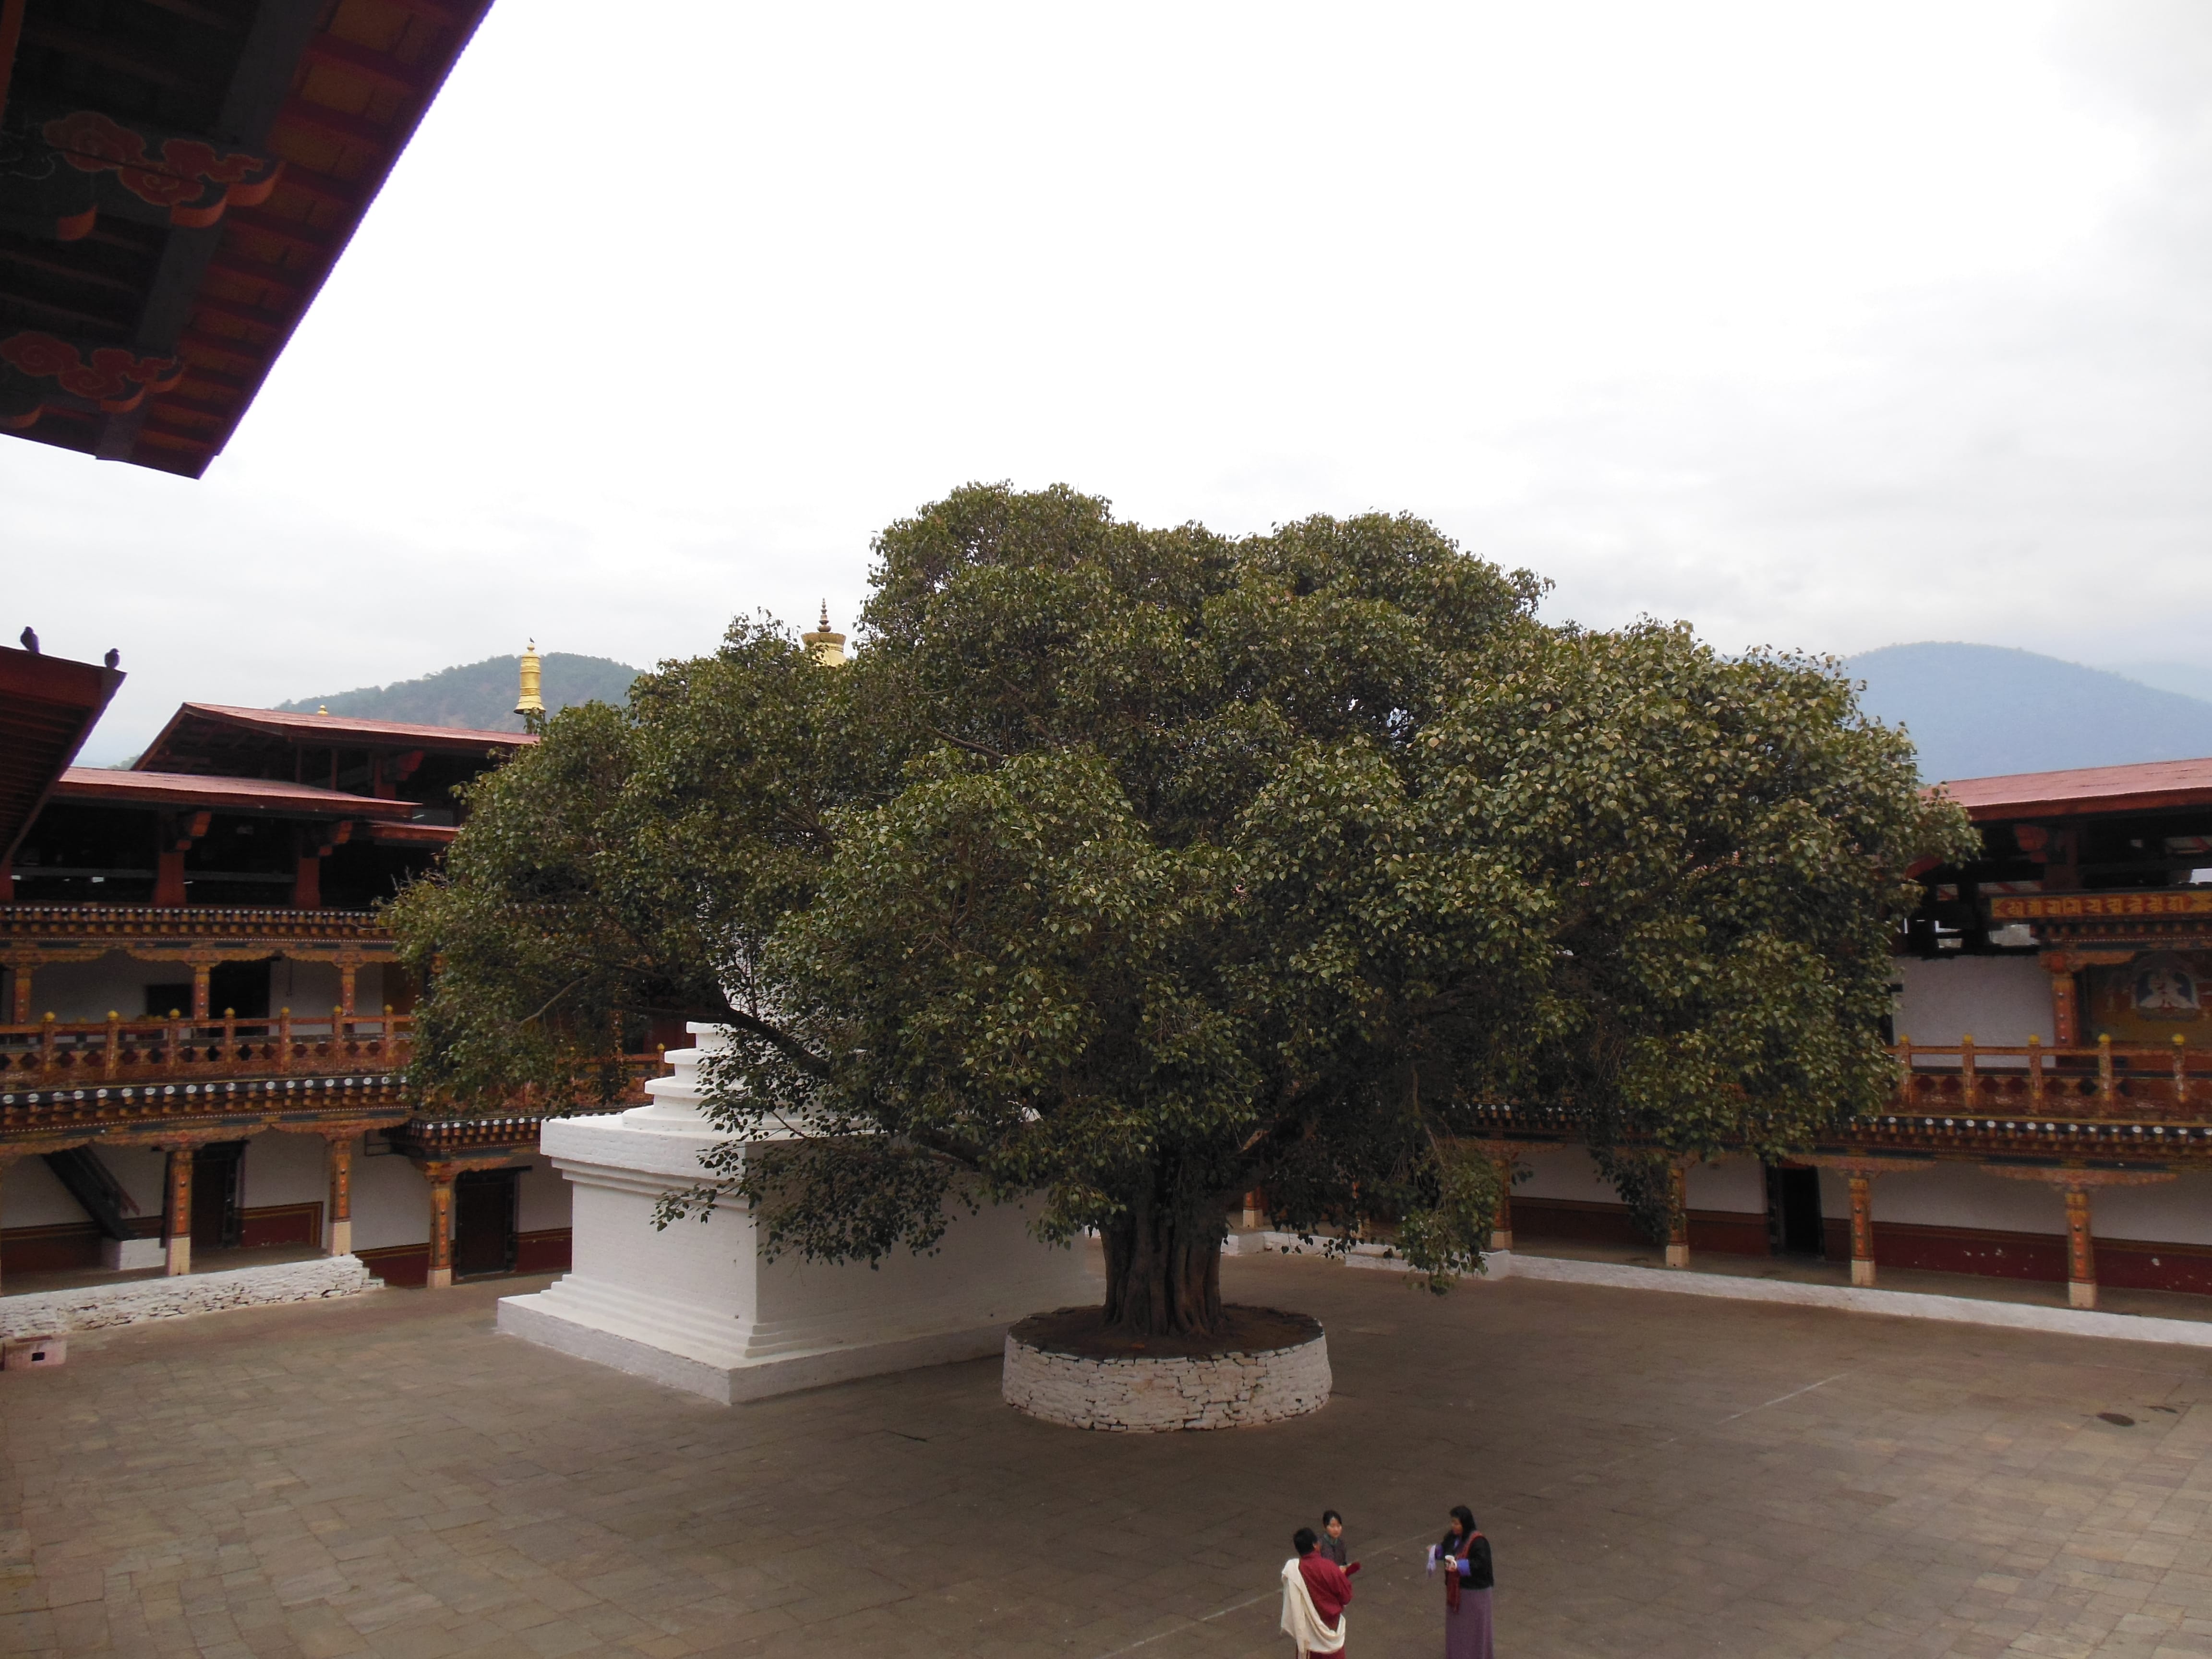 Government officials converse peacefully under the Bodhi Tree at the Punakha Dzong. Punakha was the ex-capital of Bhutan, and many ministries still have their headquarters in the Punakha Dzong, the largest one in the country.